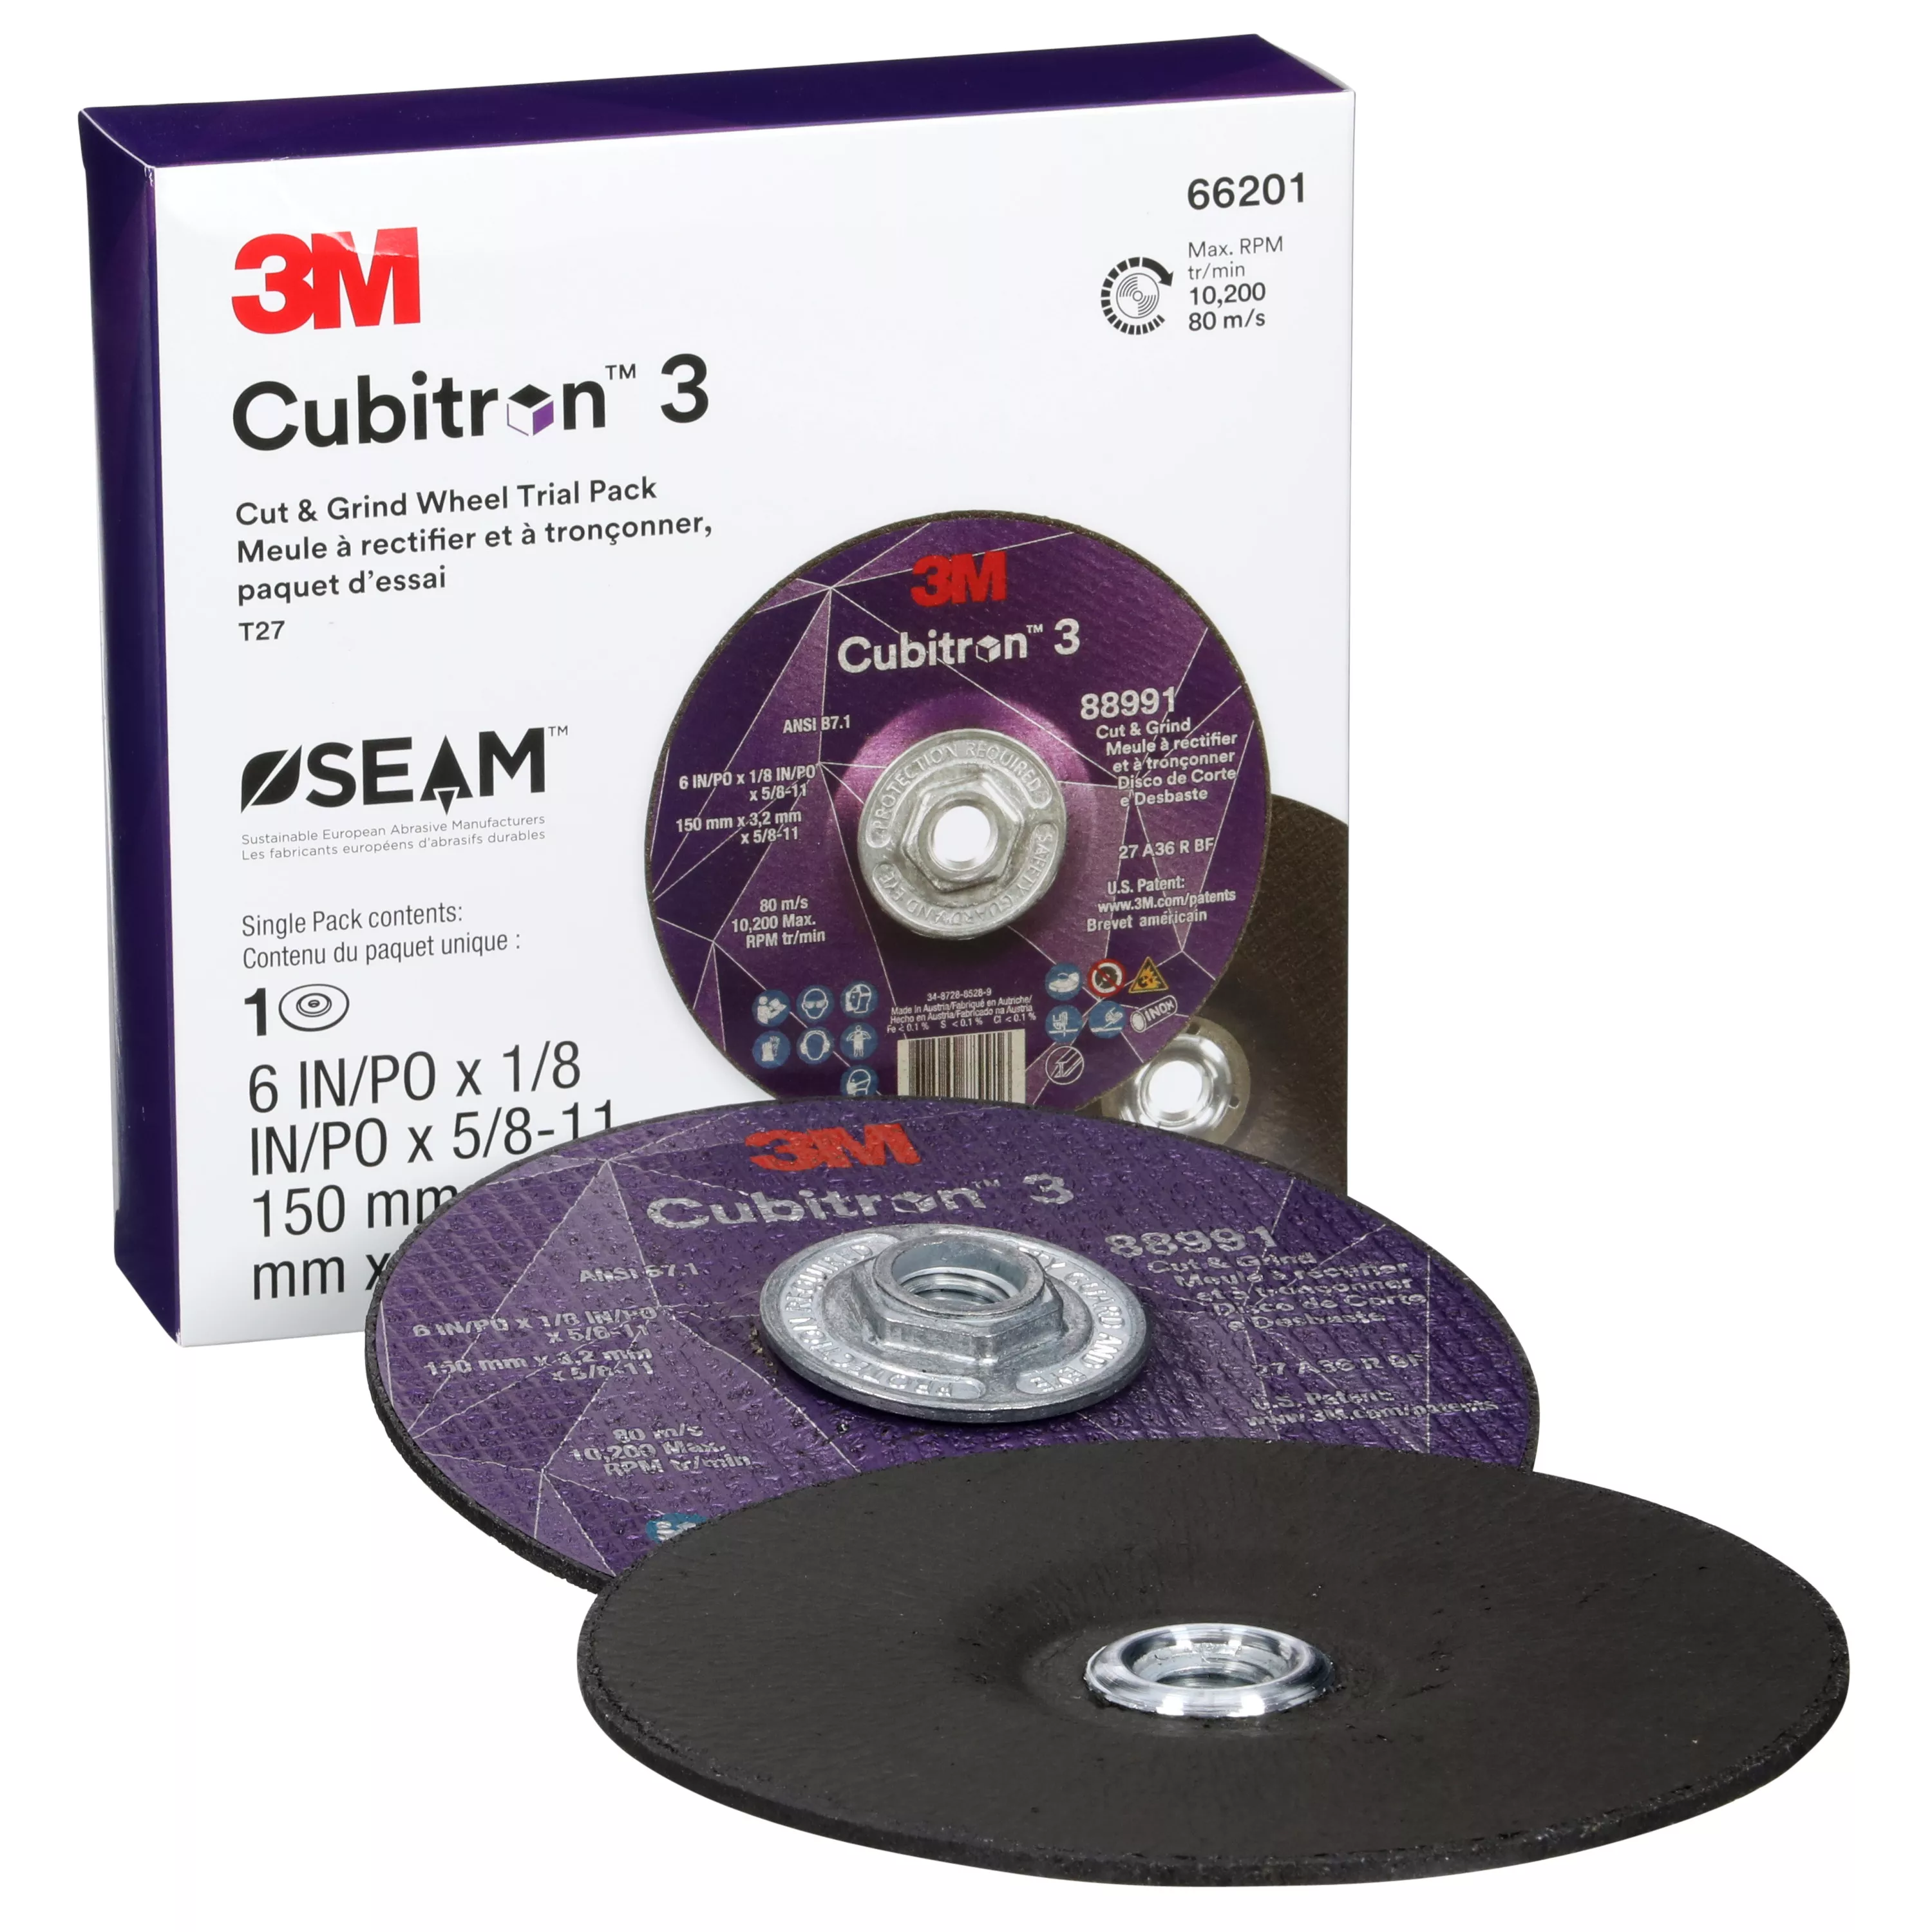 3M™ Cubitron™ 3 Cut and Grind Wheel, 66201, 36+, Type 27, 6 in x 1/8 in x 5/8 in-11 (150mmx3.2mm), ANSI, 10 ea/Case, Trial Pack